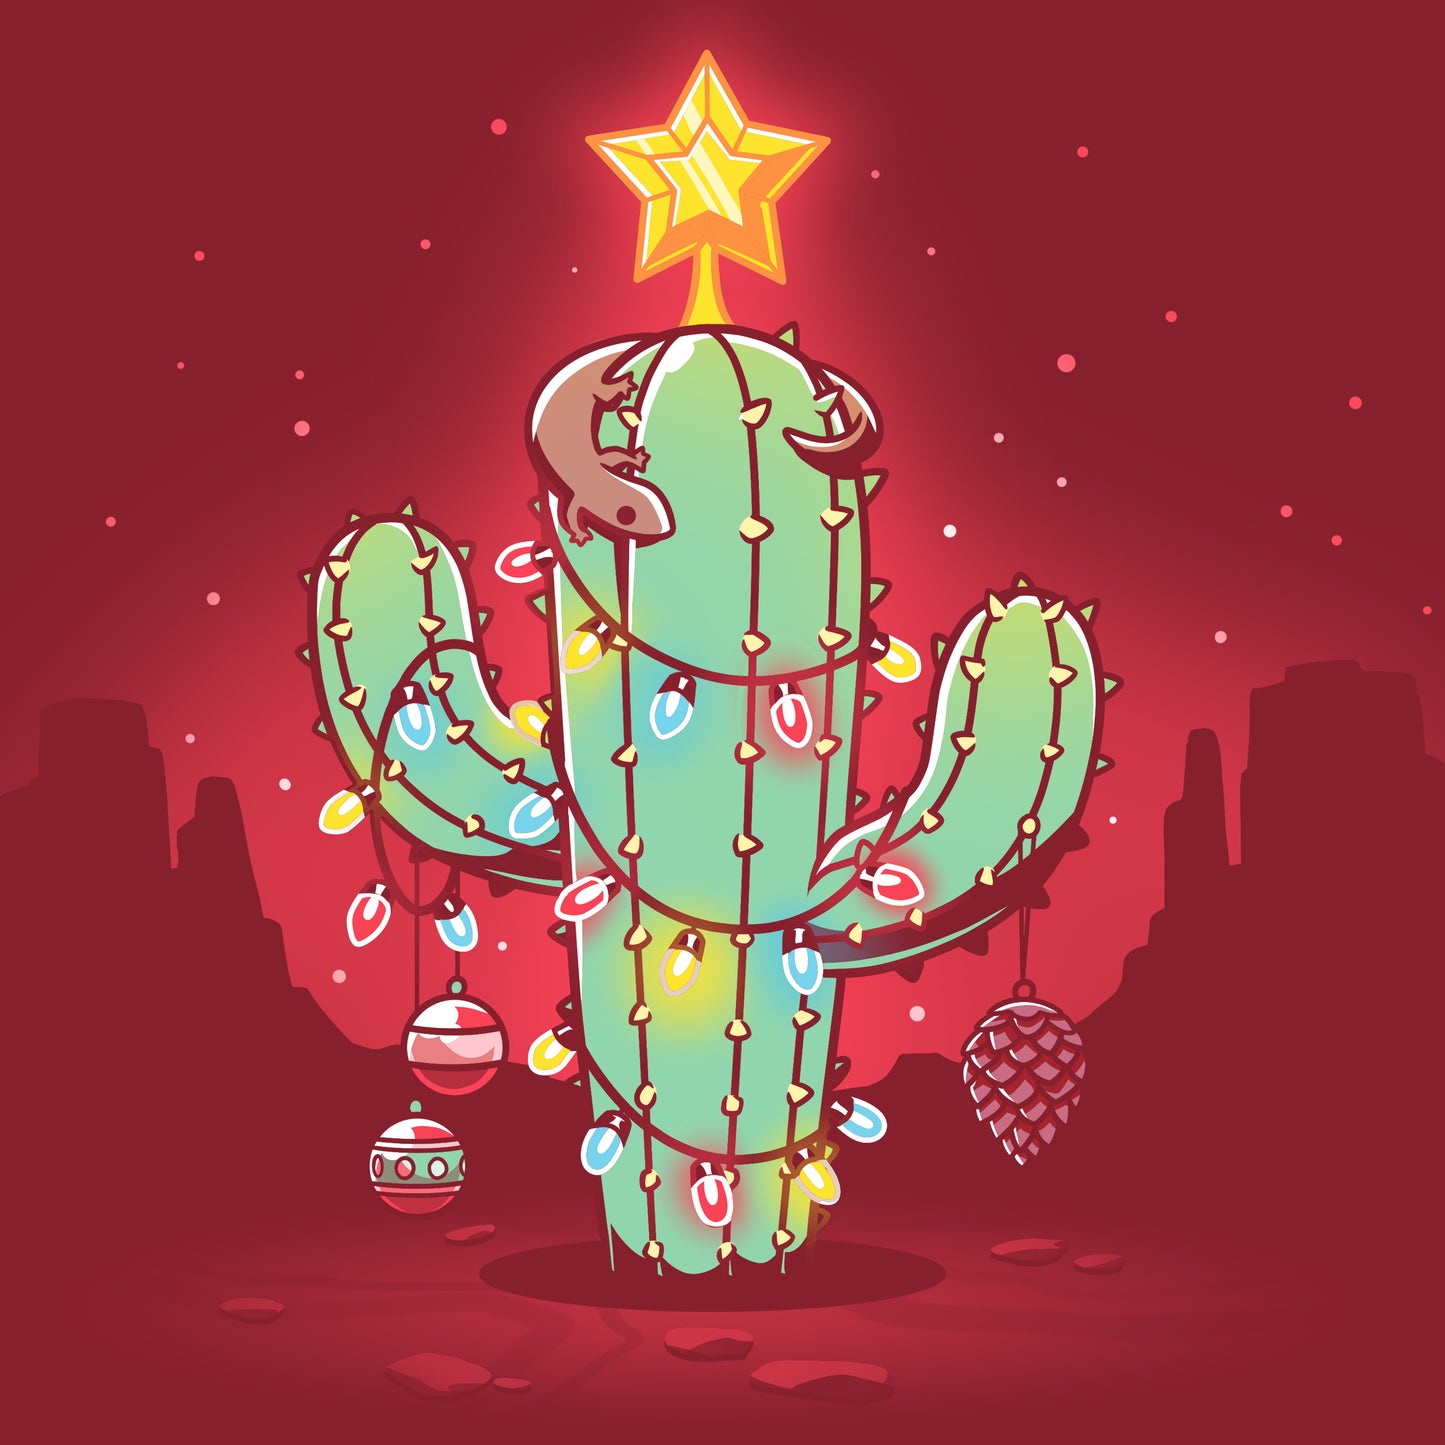 Get into the holiday spirit with a TeeTurtle Desert Christmas cactus adorned with twinkling Christmas lights and crowned with a shining star. This unique TeeTurtle original brings a touch of whimsy to your.